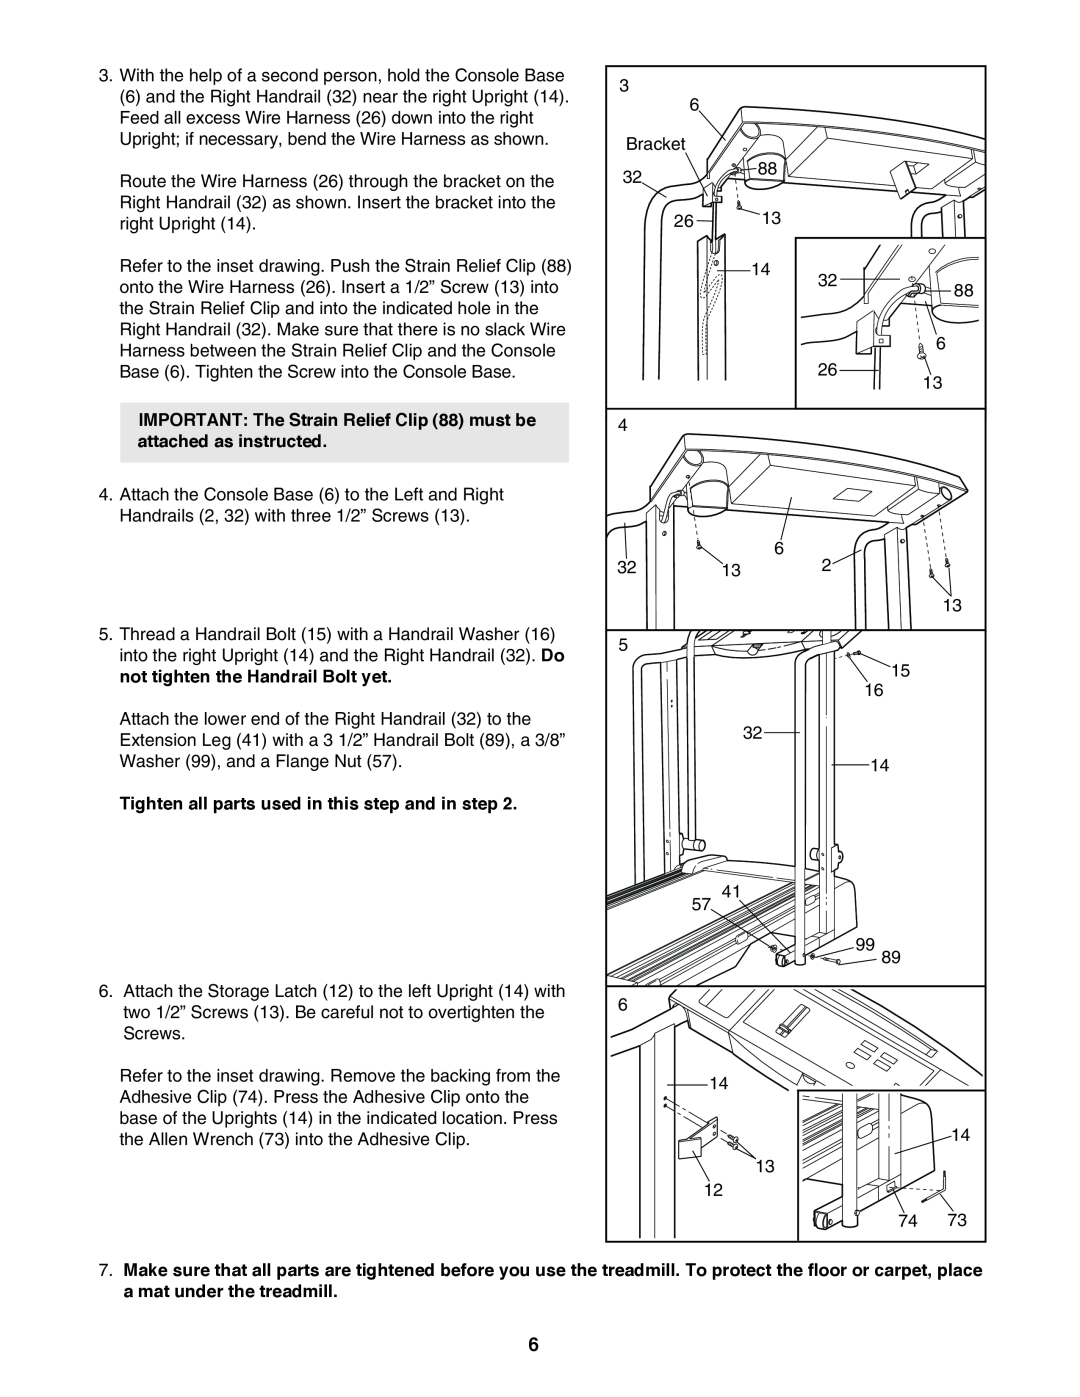 ProForm 831.297390 user manual IMPORTANT The Strain Relief Clip 88 must be attached as instructed 